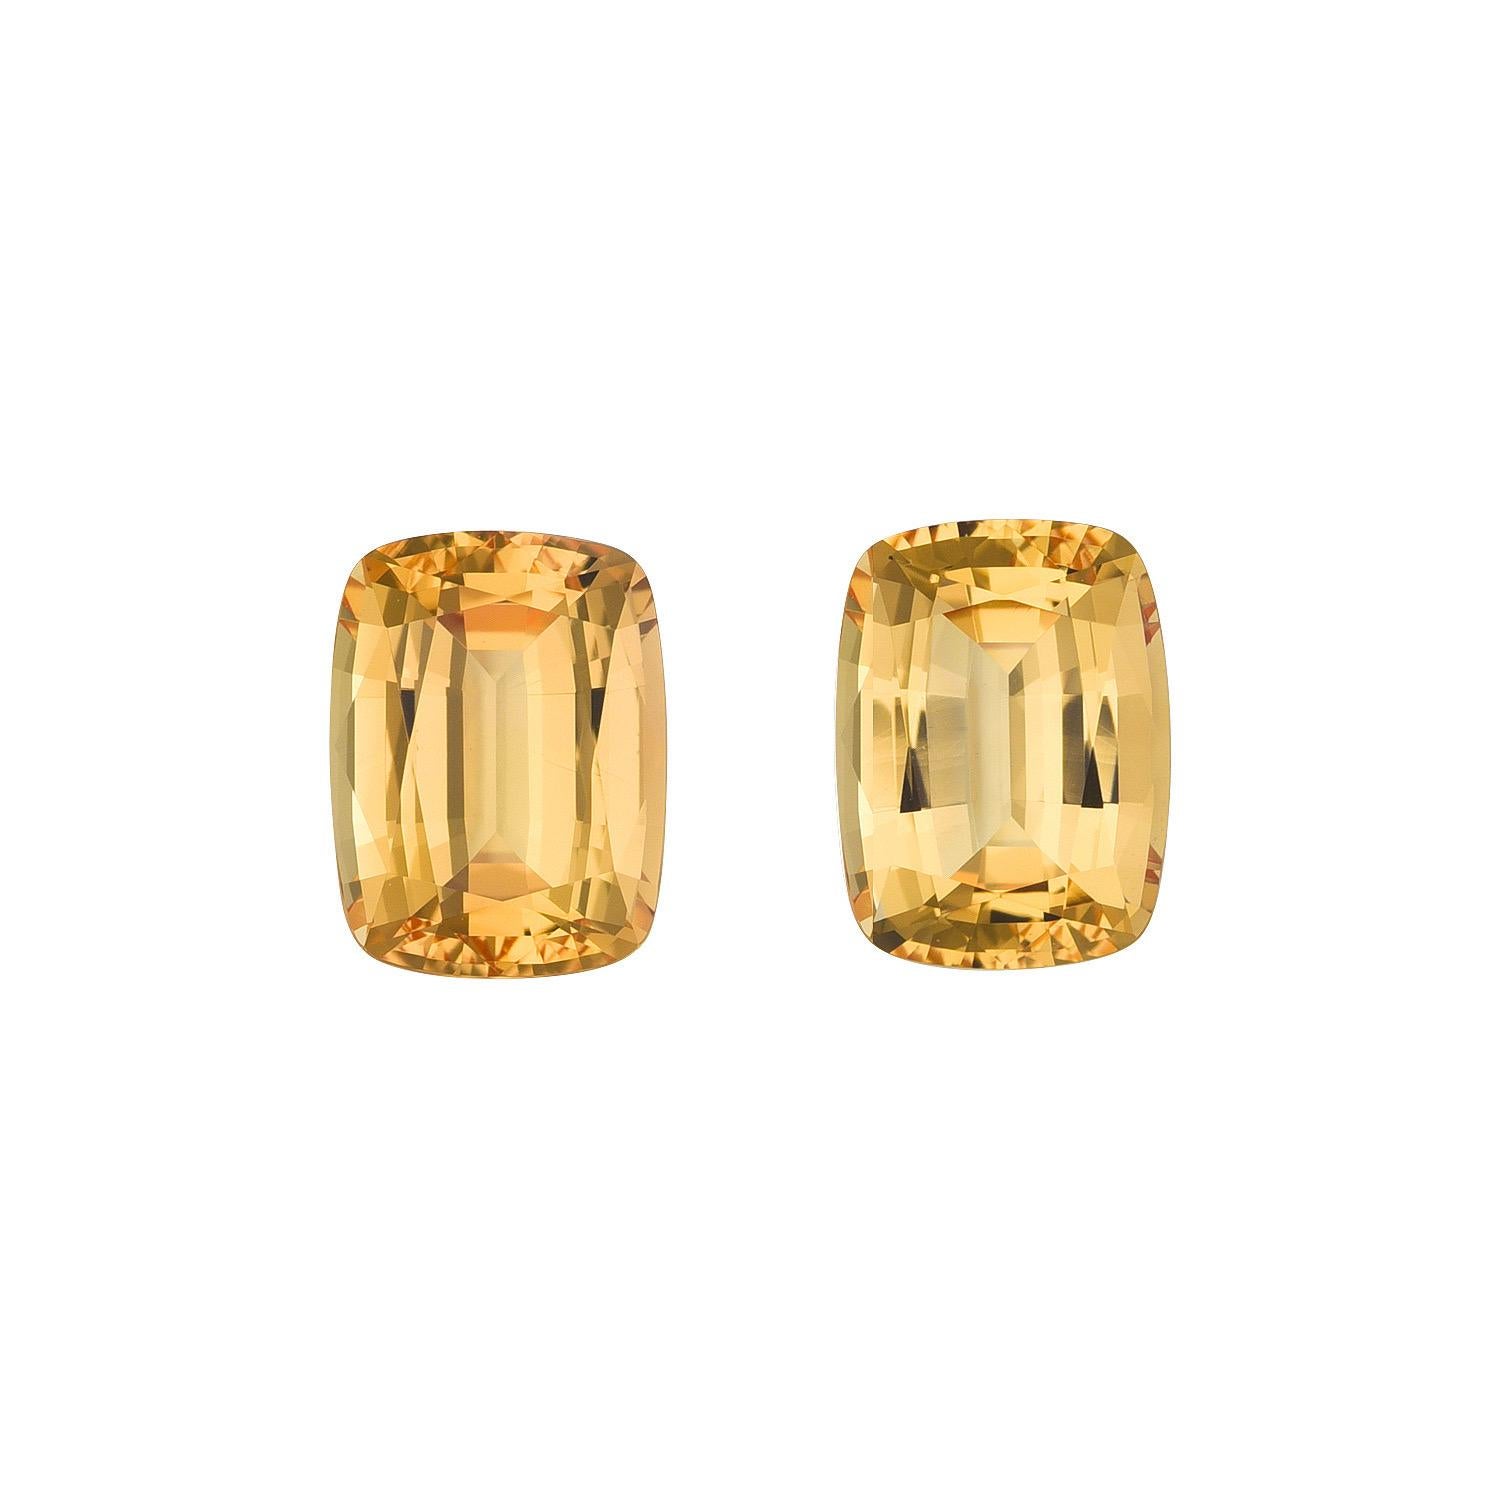 Contemporary Imperial Topaz Earrings Loose Gemstones 3.36 Carat Unmounted Cushions For Sale